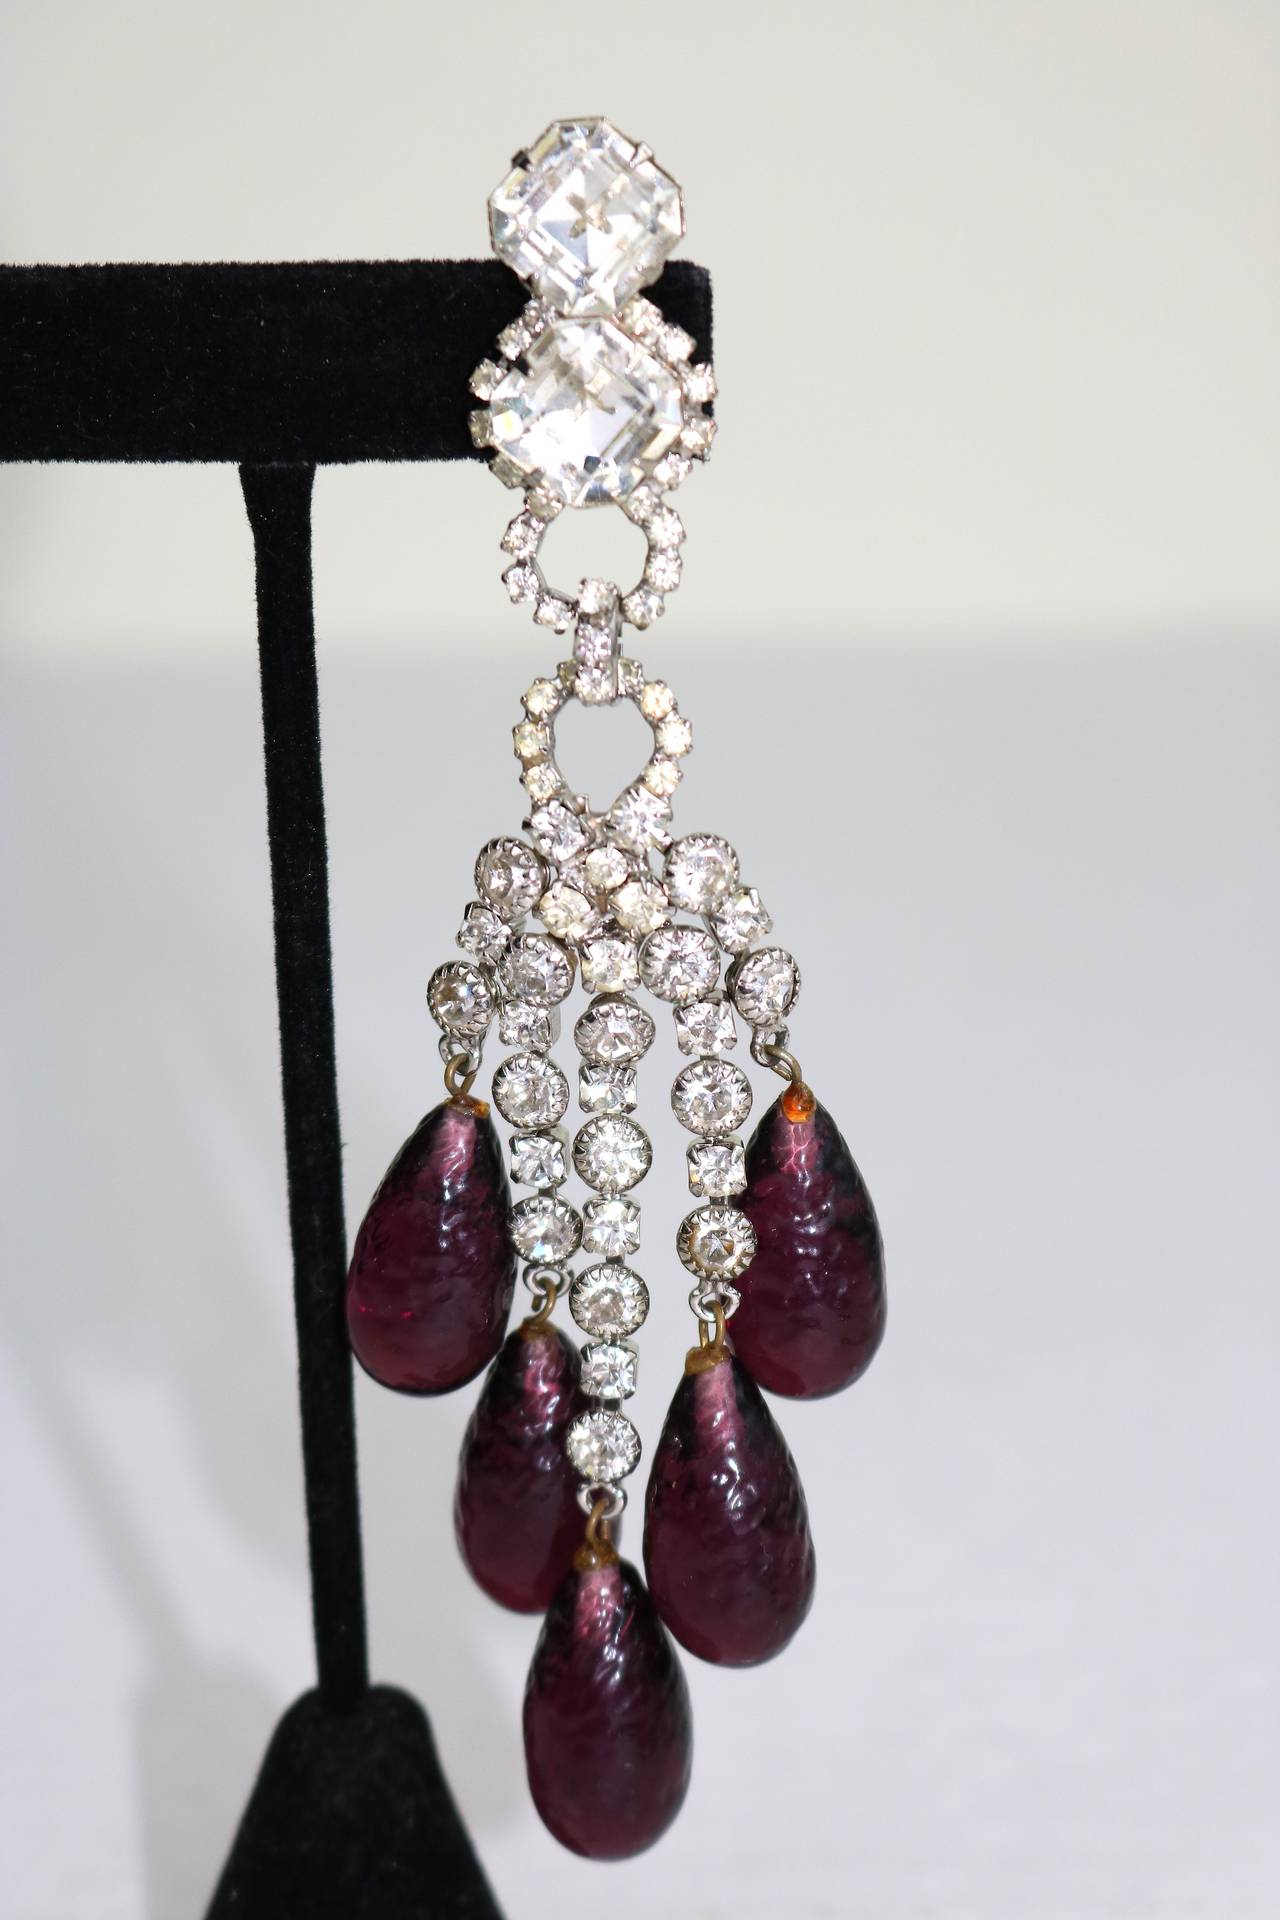 Amazing Robert Sorrell Faux Diamond and Amethyst Chandelier Ear Clips In Good Condition For Sale In West Palm Beach, FL